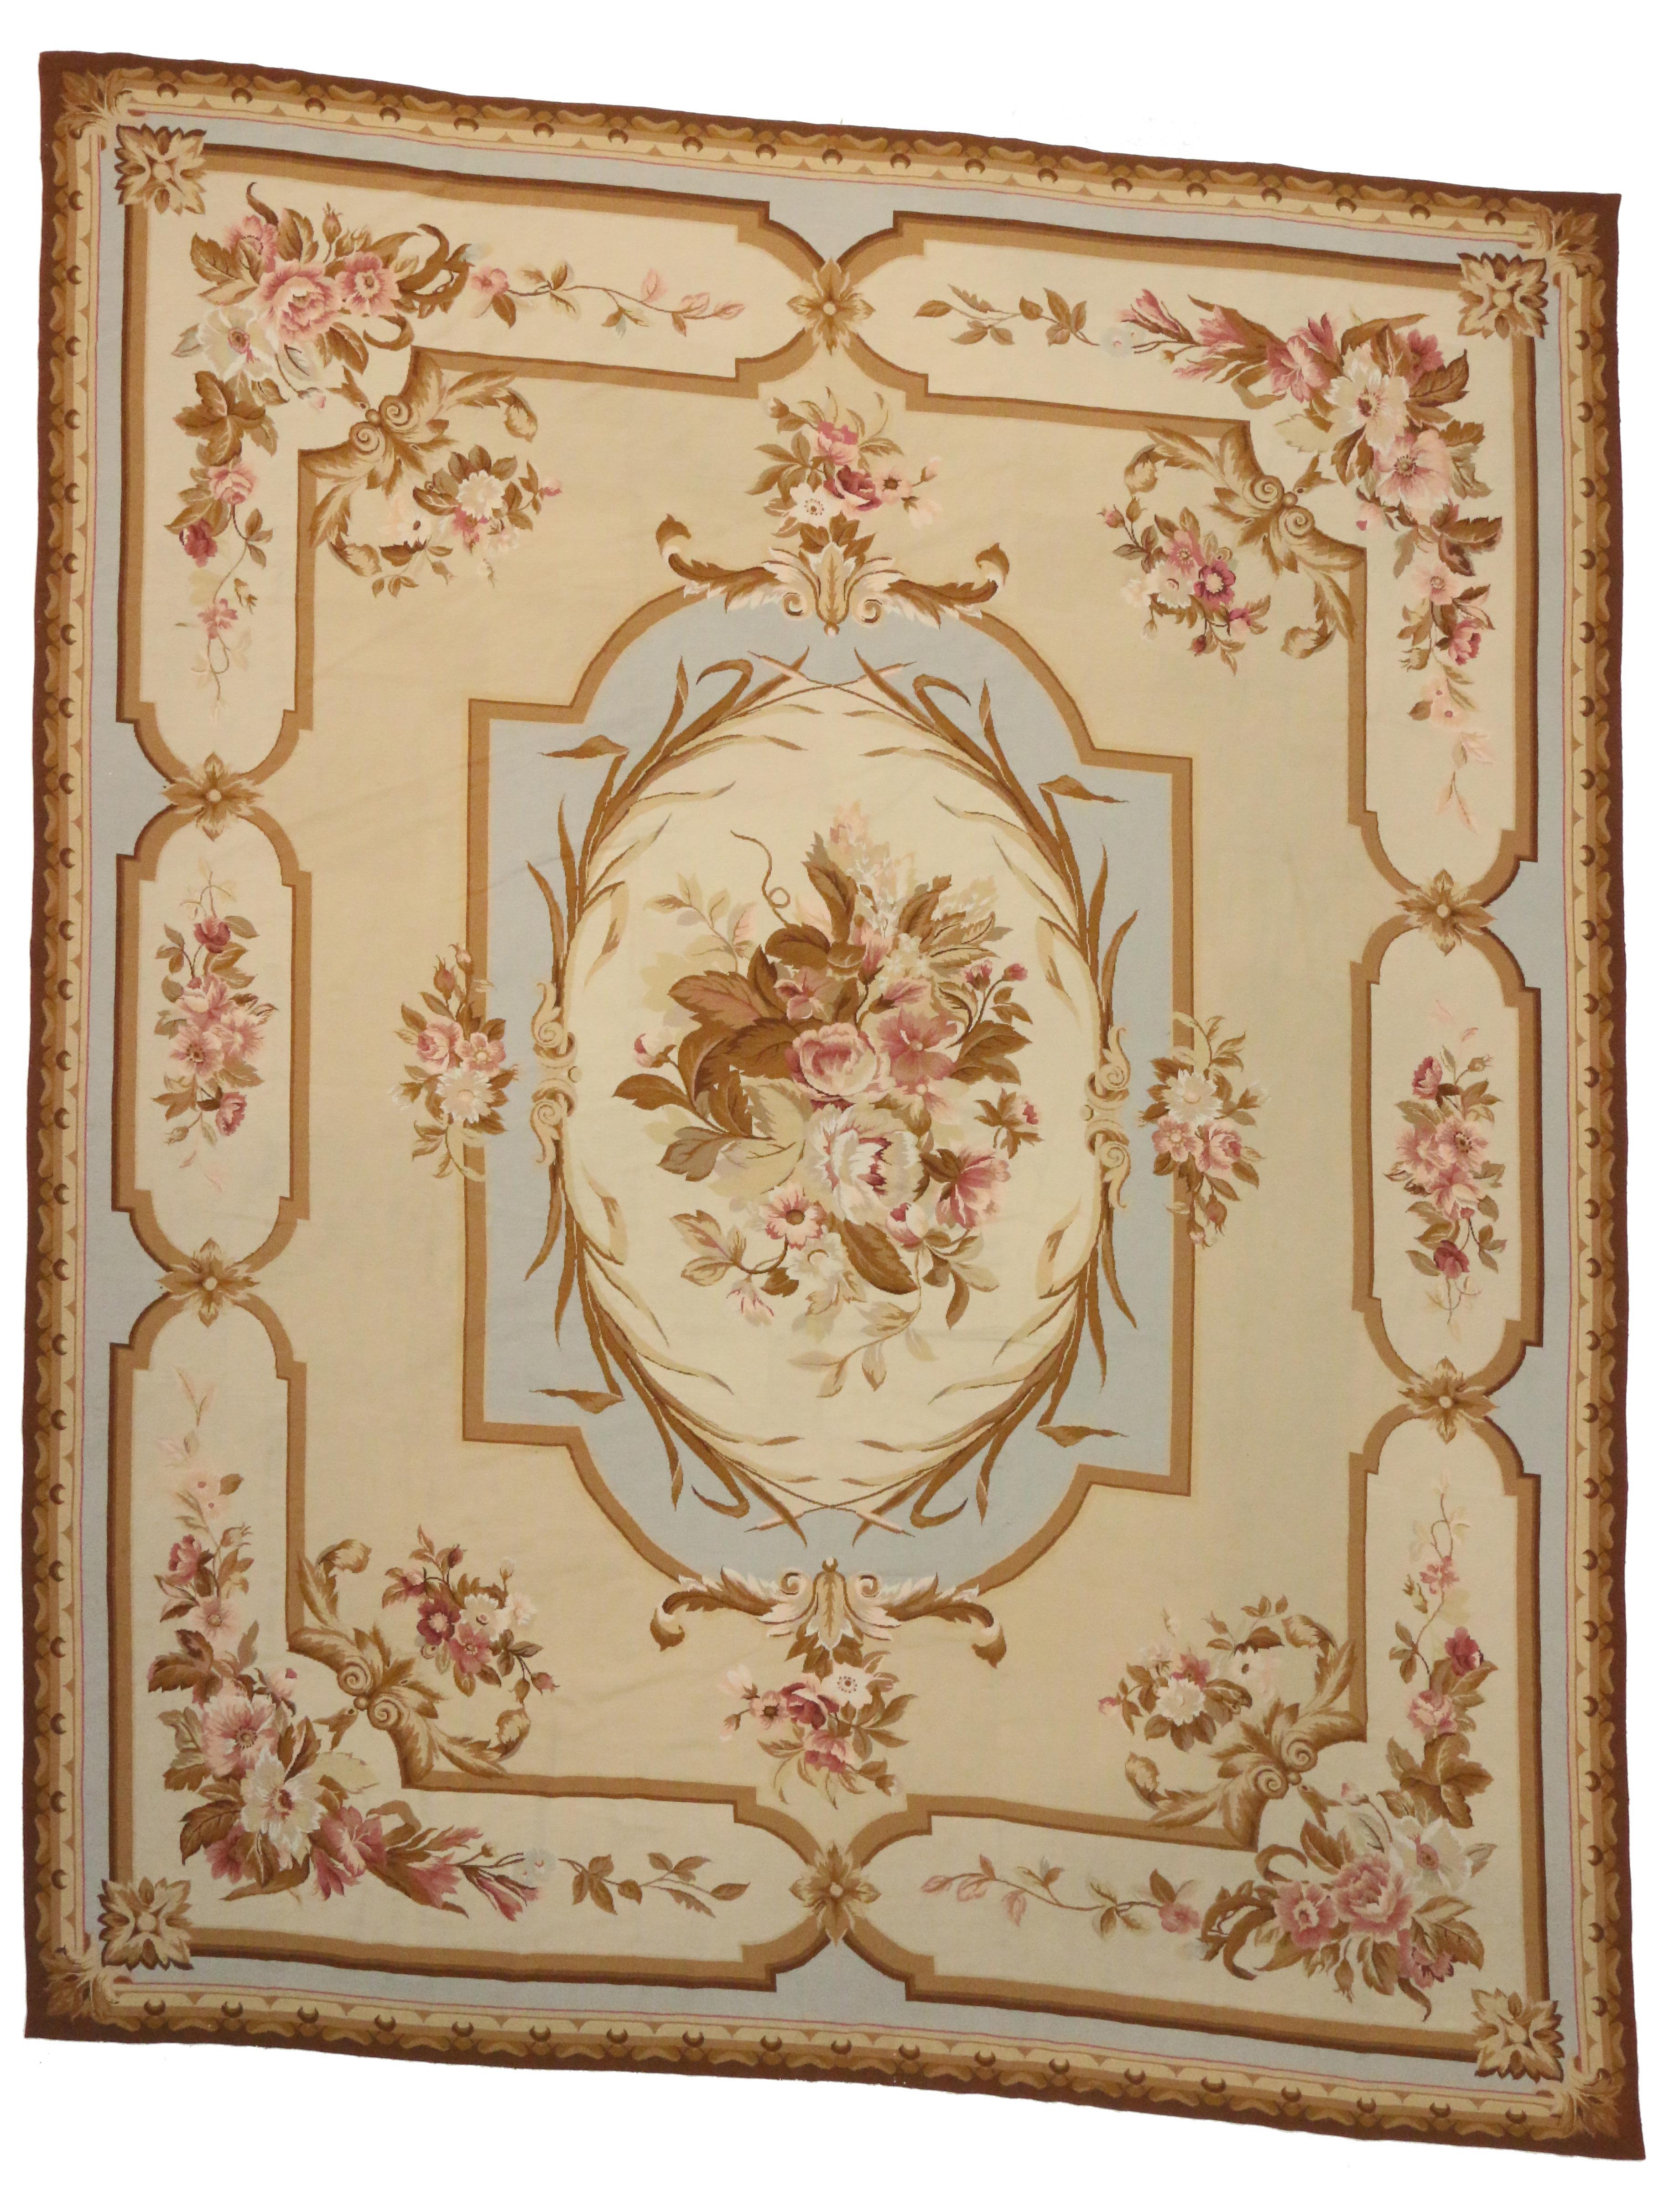 Vintage Chinese Needlepoint Rug with Aubusson Design and French Provincial Style 1